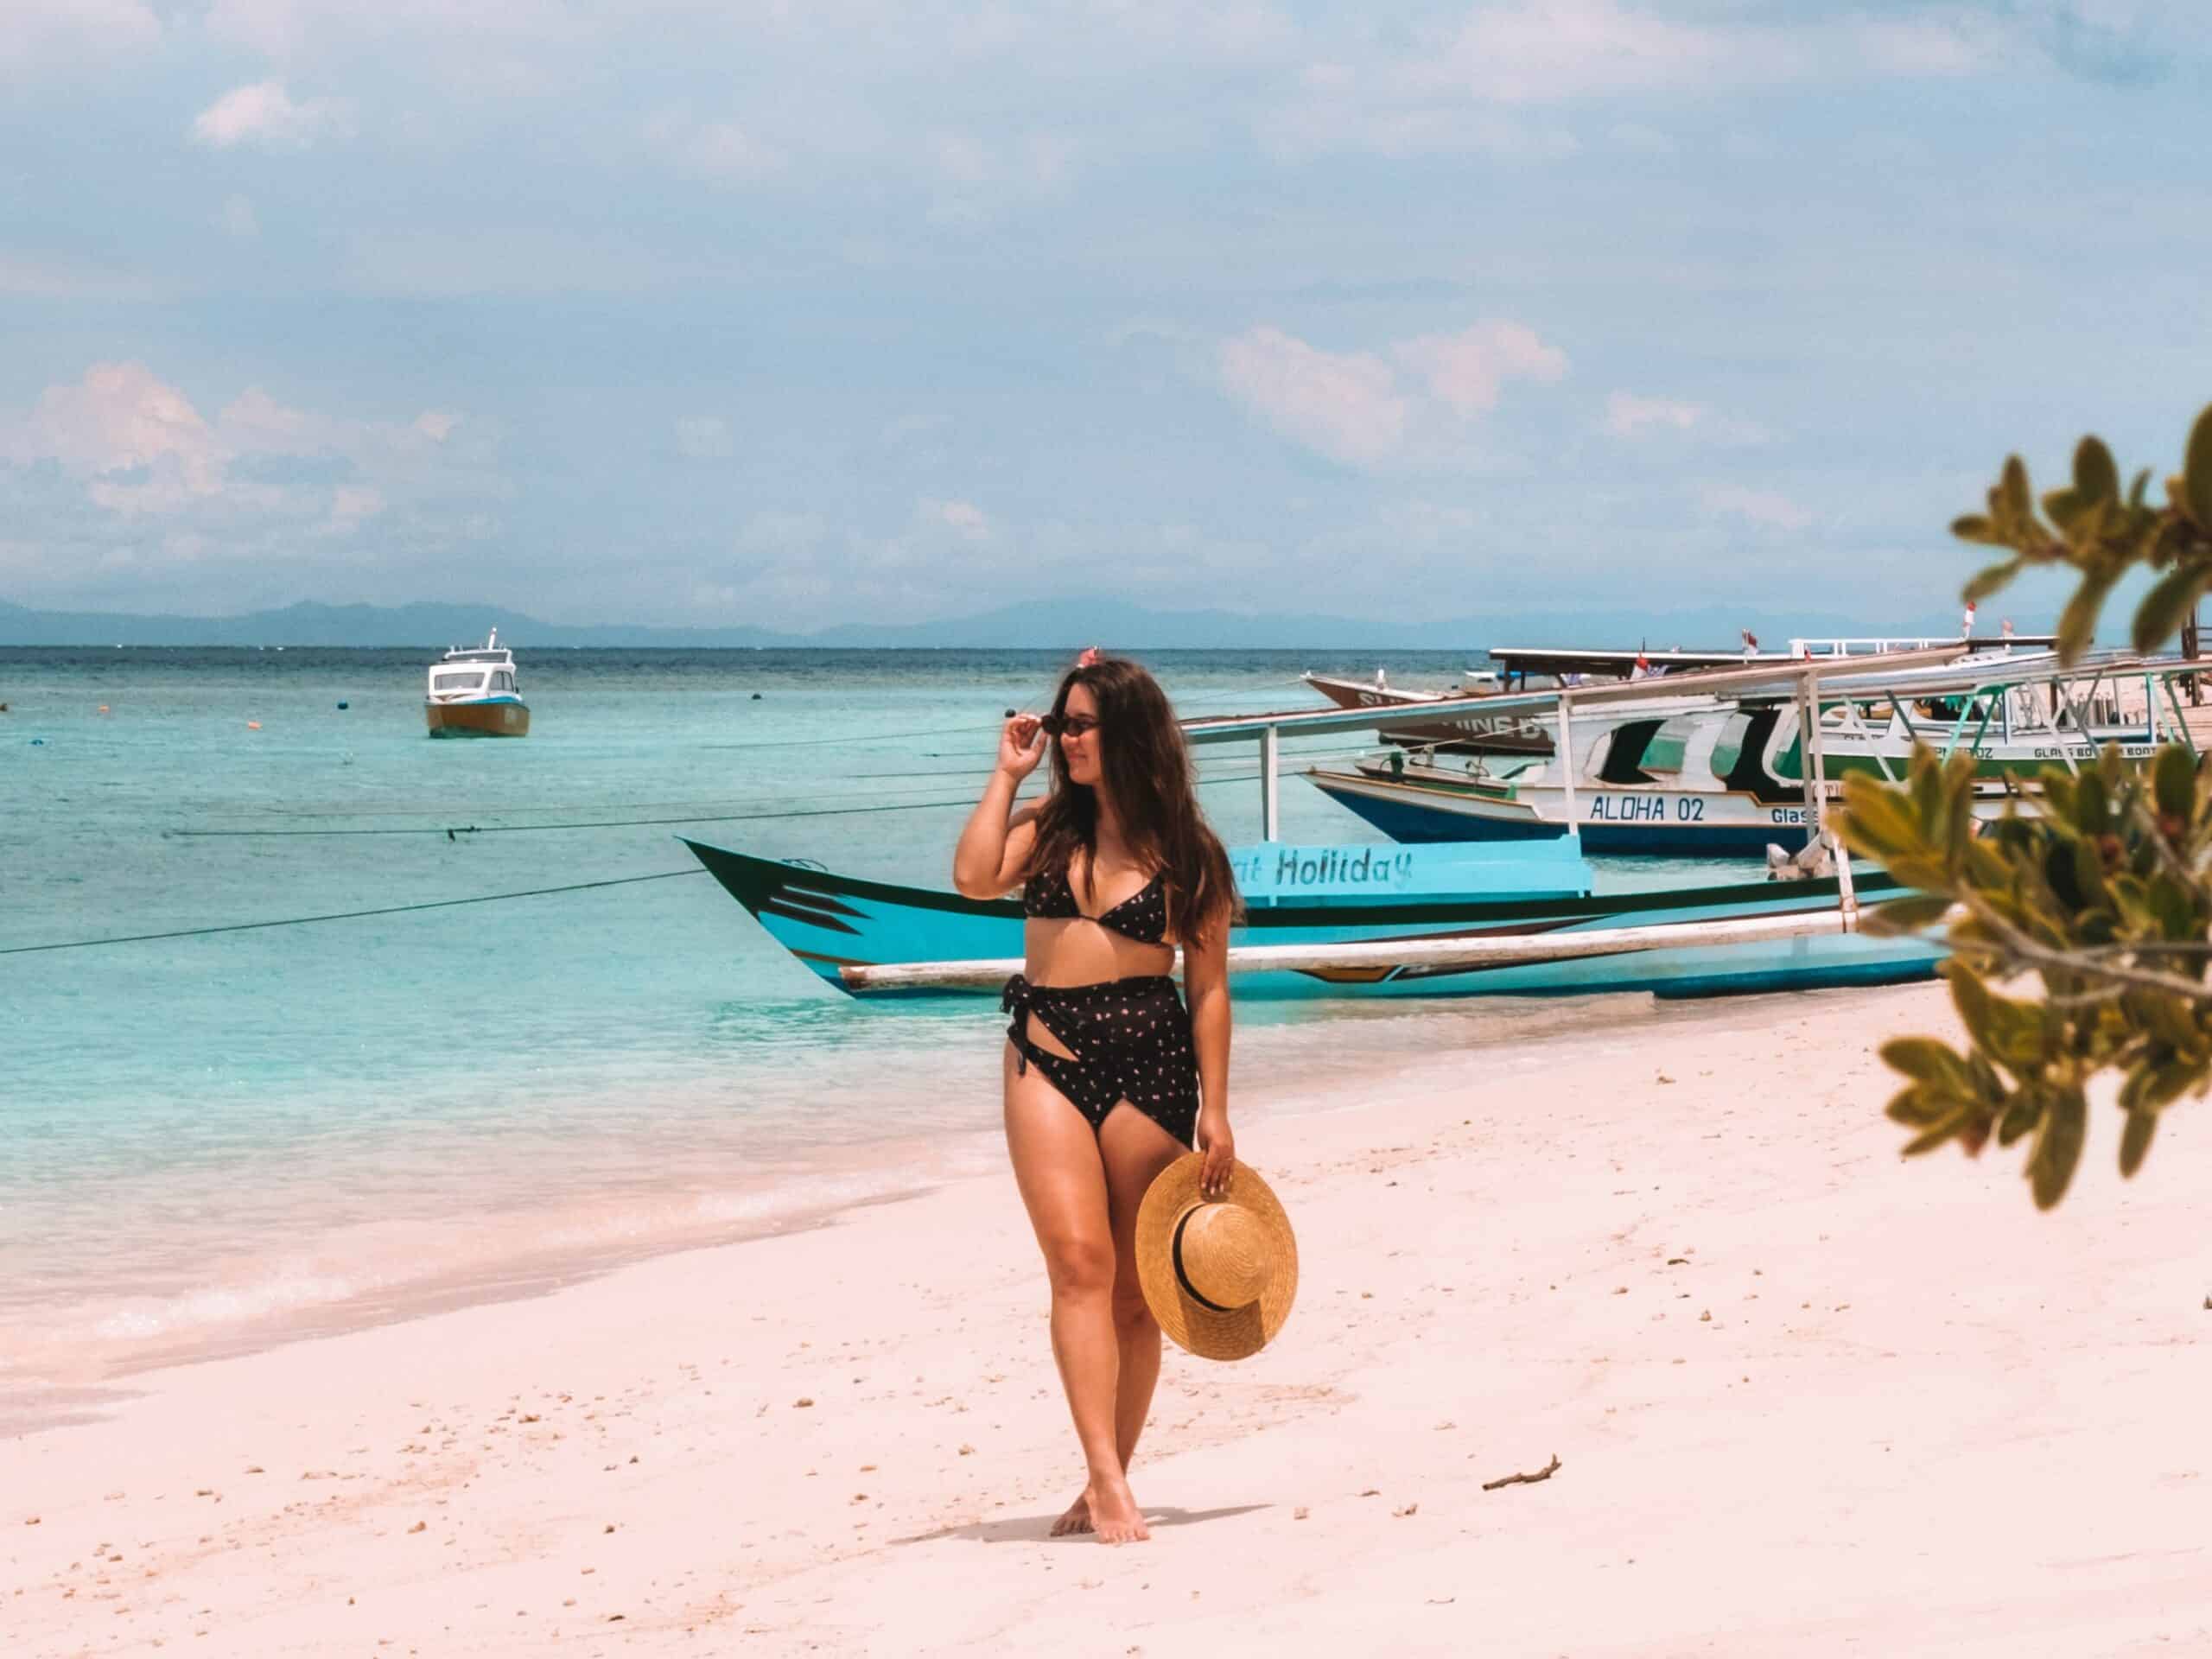 Gili Trawangan for Solo Travelers: How to Fall in Love with Gili T Solo